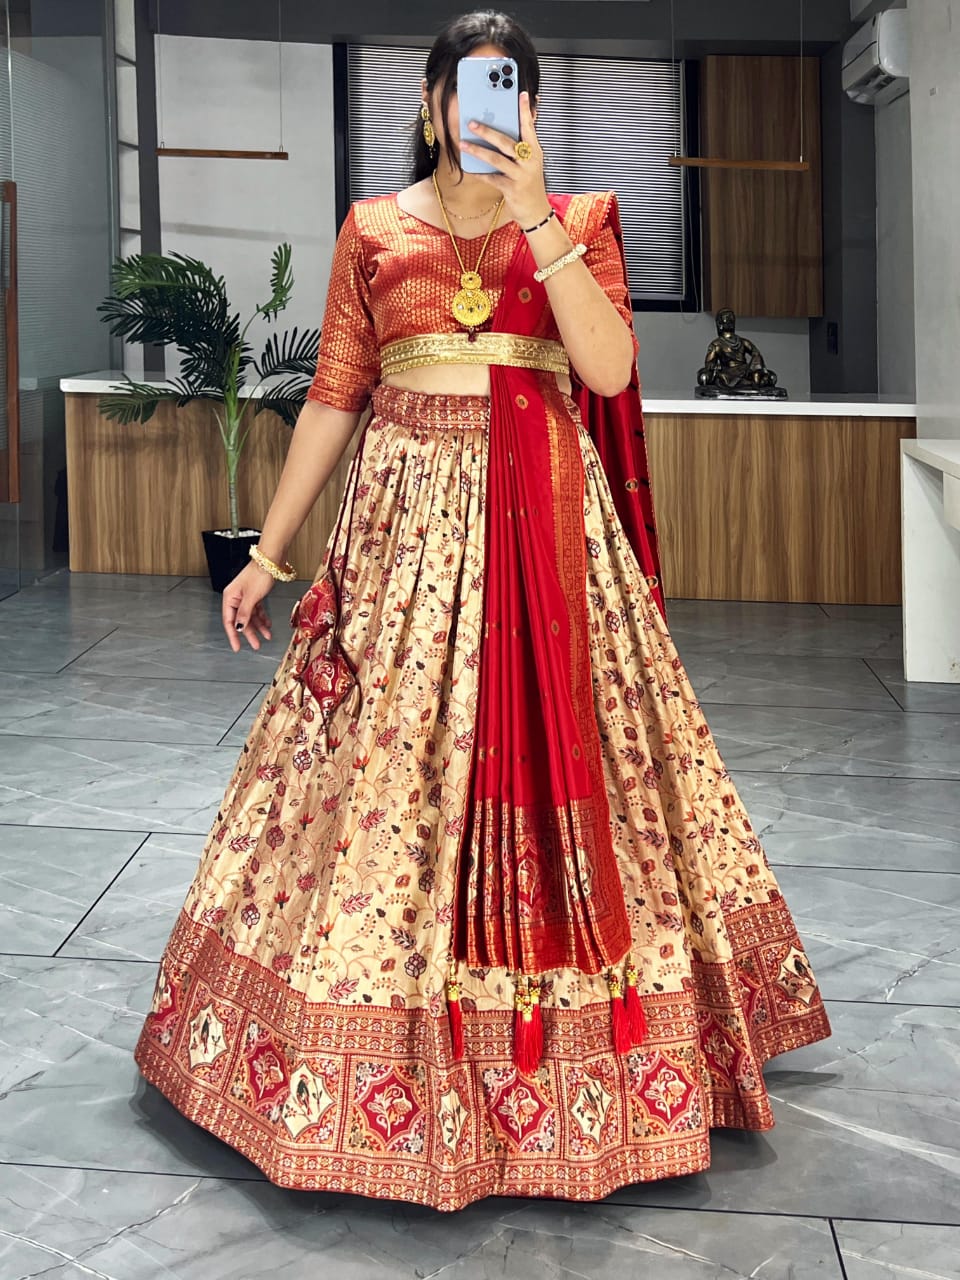 SHYAMAL & BHUMIKA US - Dayana wears a bias cut tango red lehenga with a  spray of floral embroidery all teamed with a champagne gold blouse The  blouse is completely done in